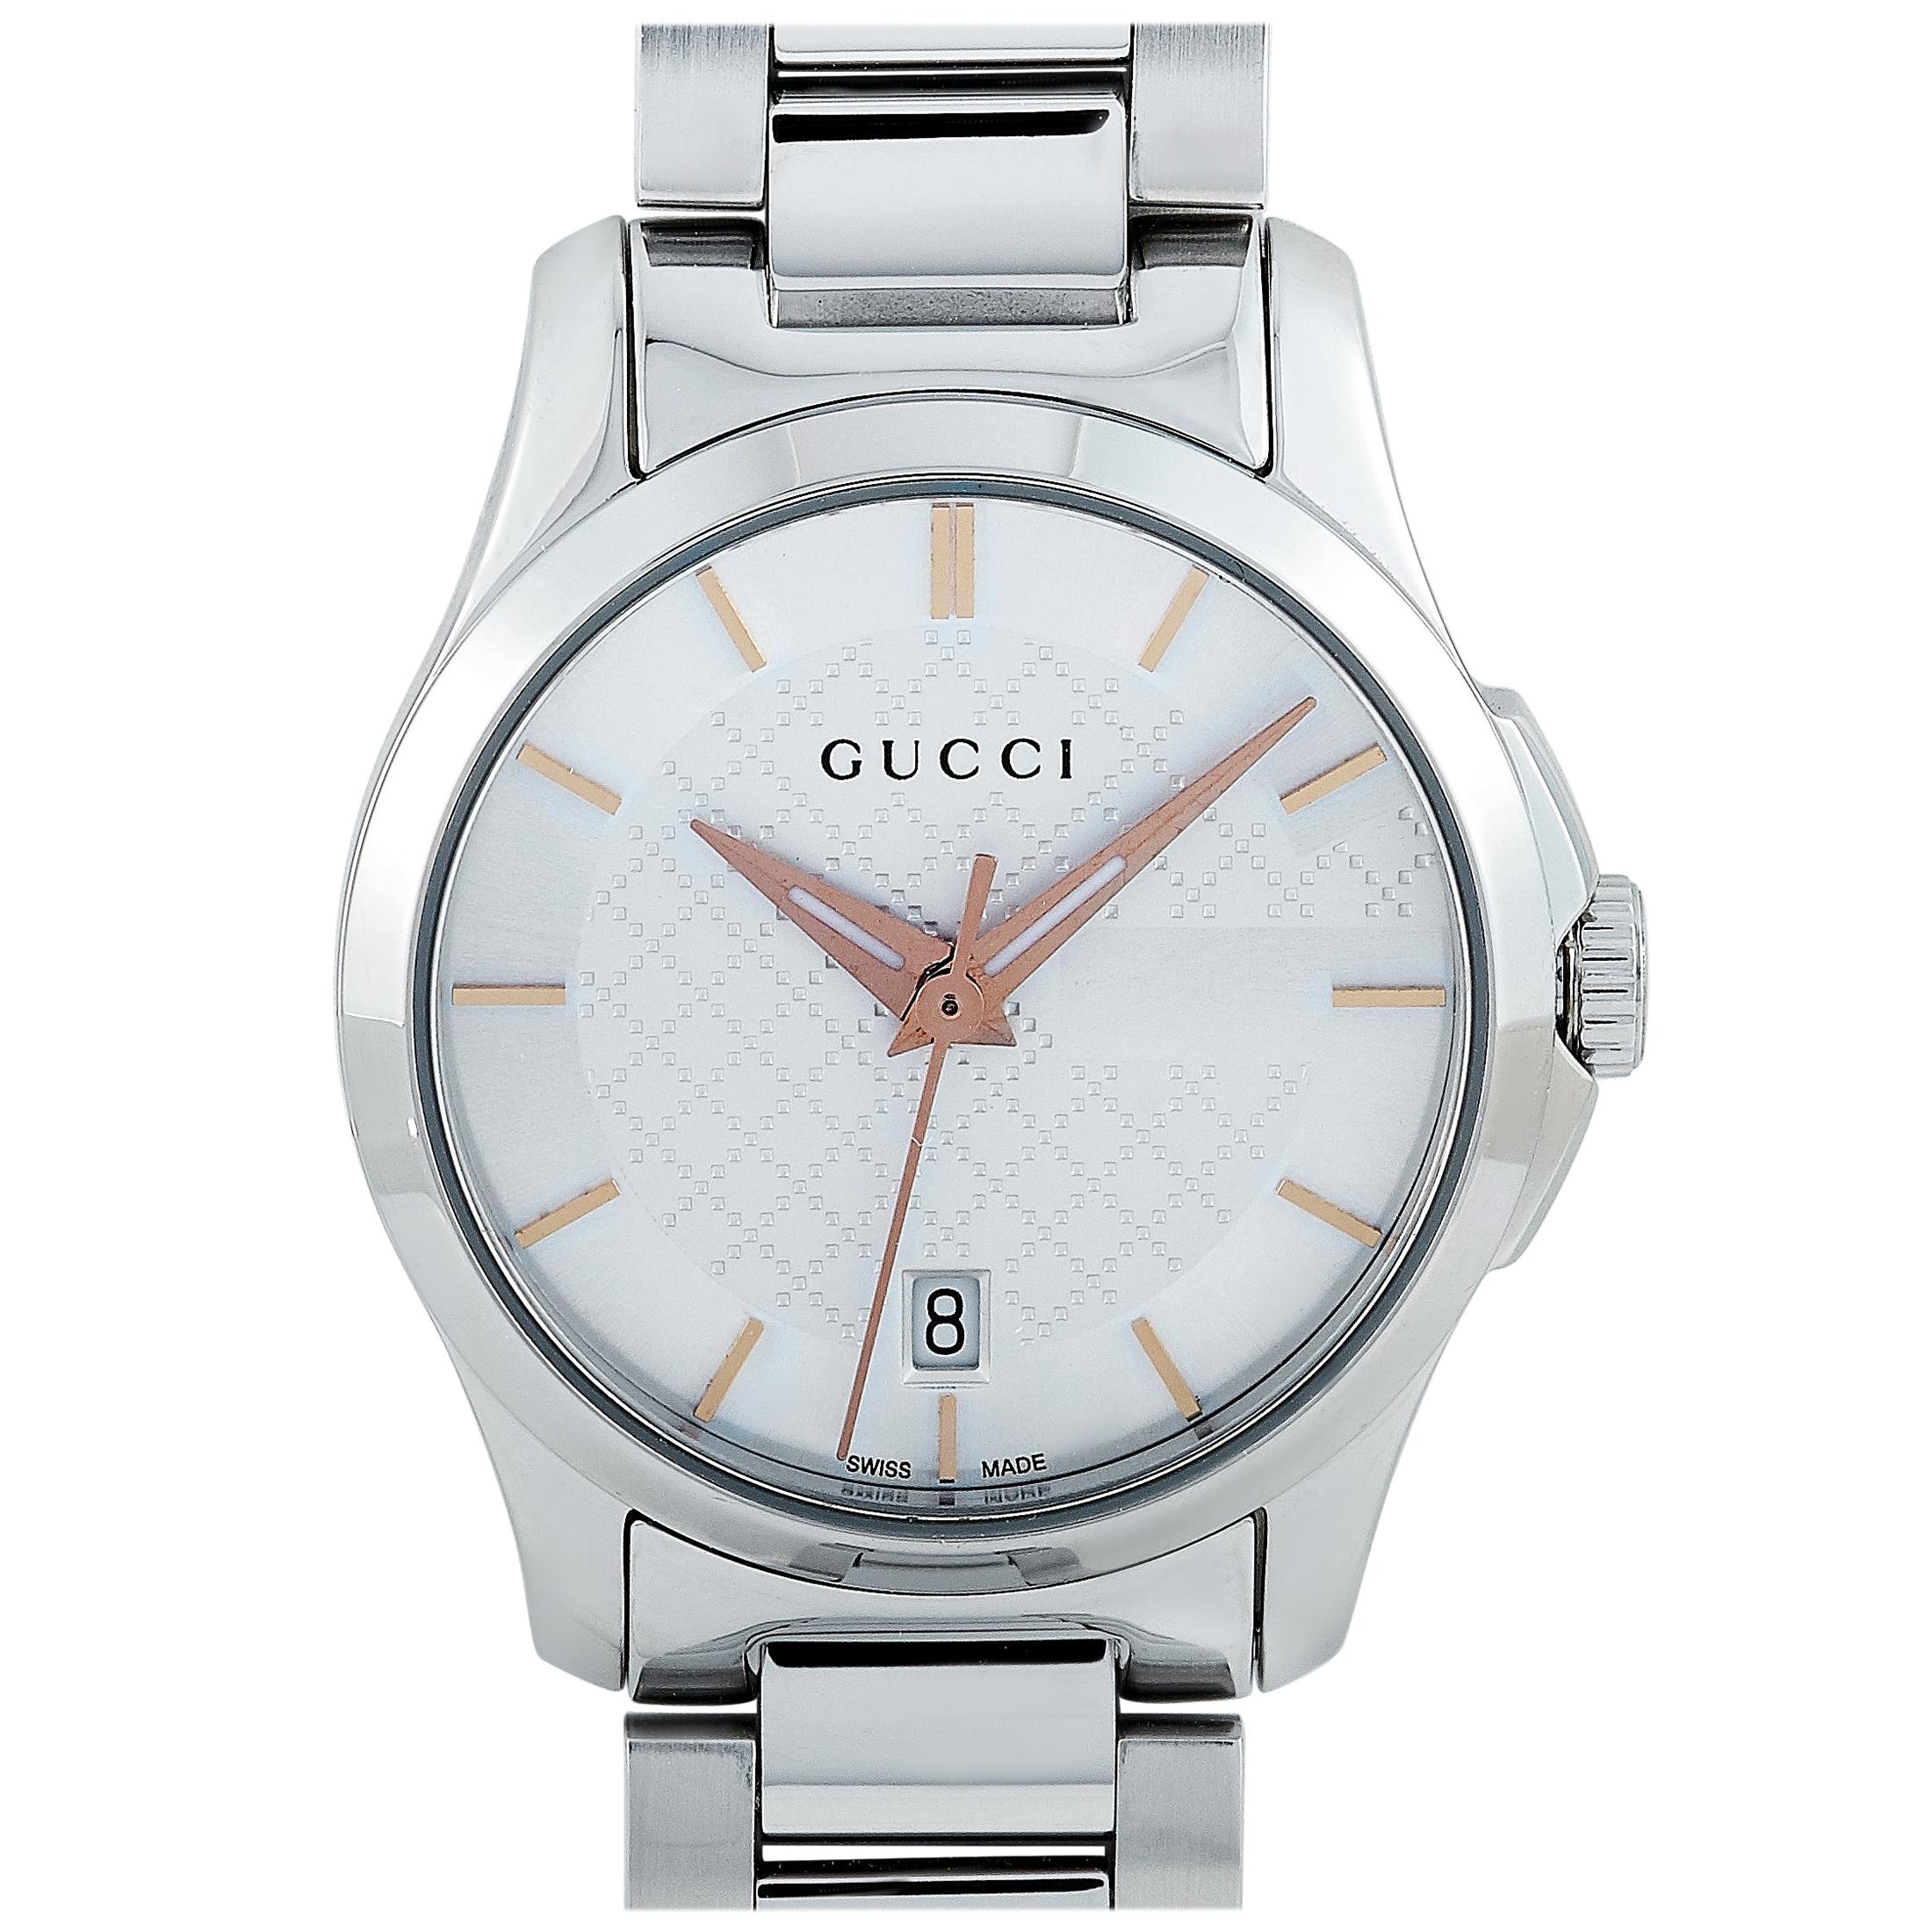 Gucci G-Timeless Stainless Steel Watch 